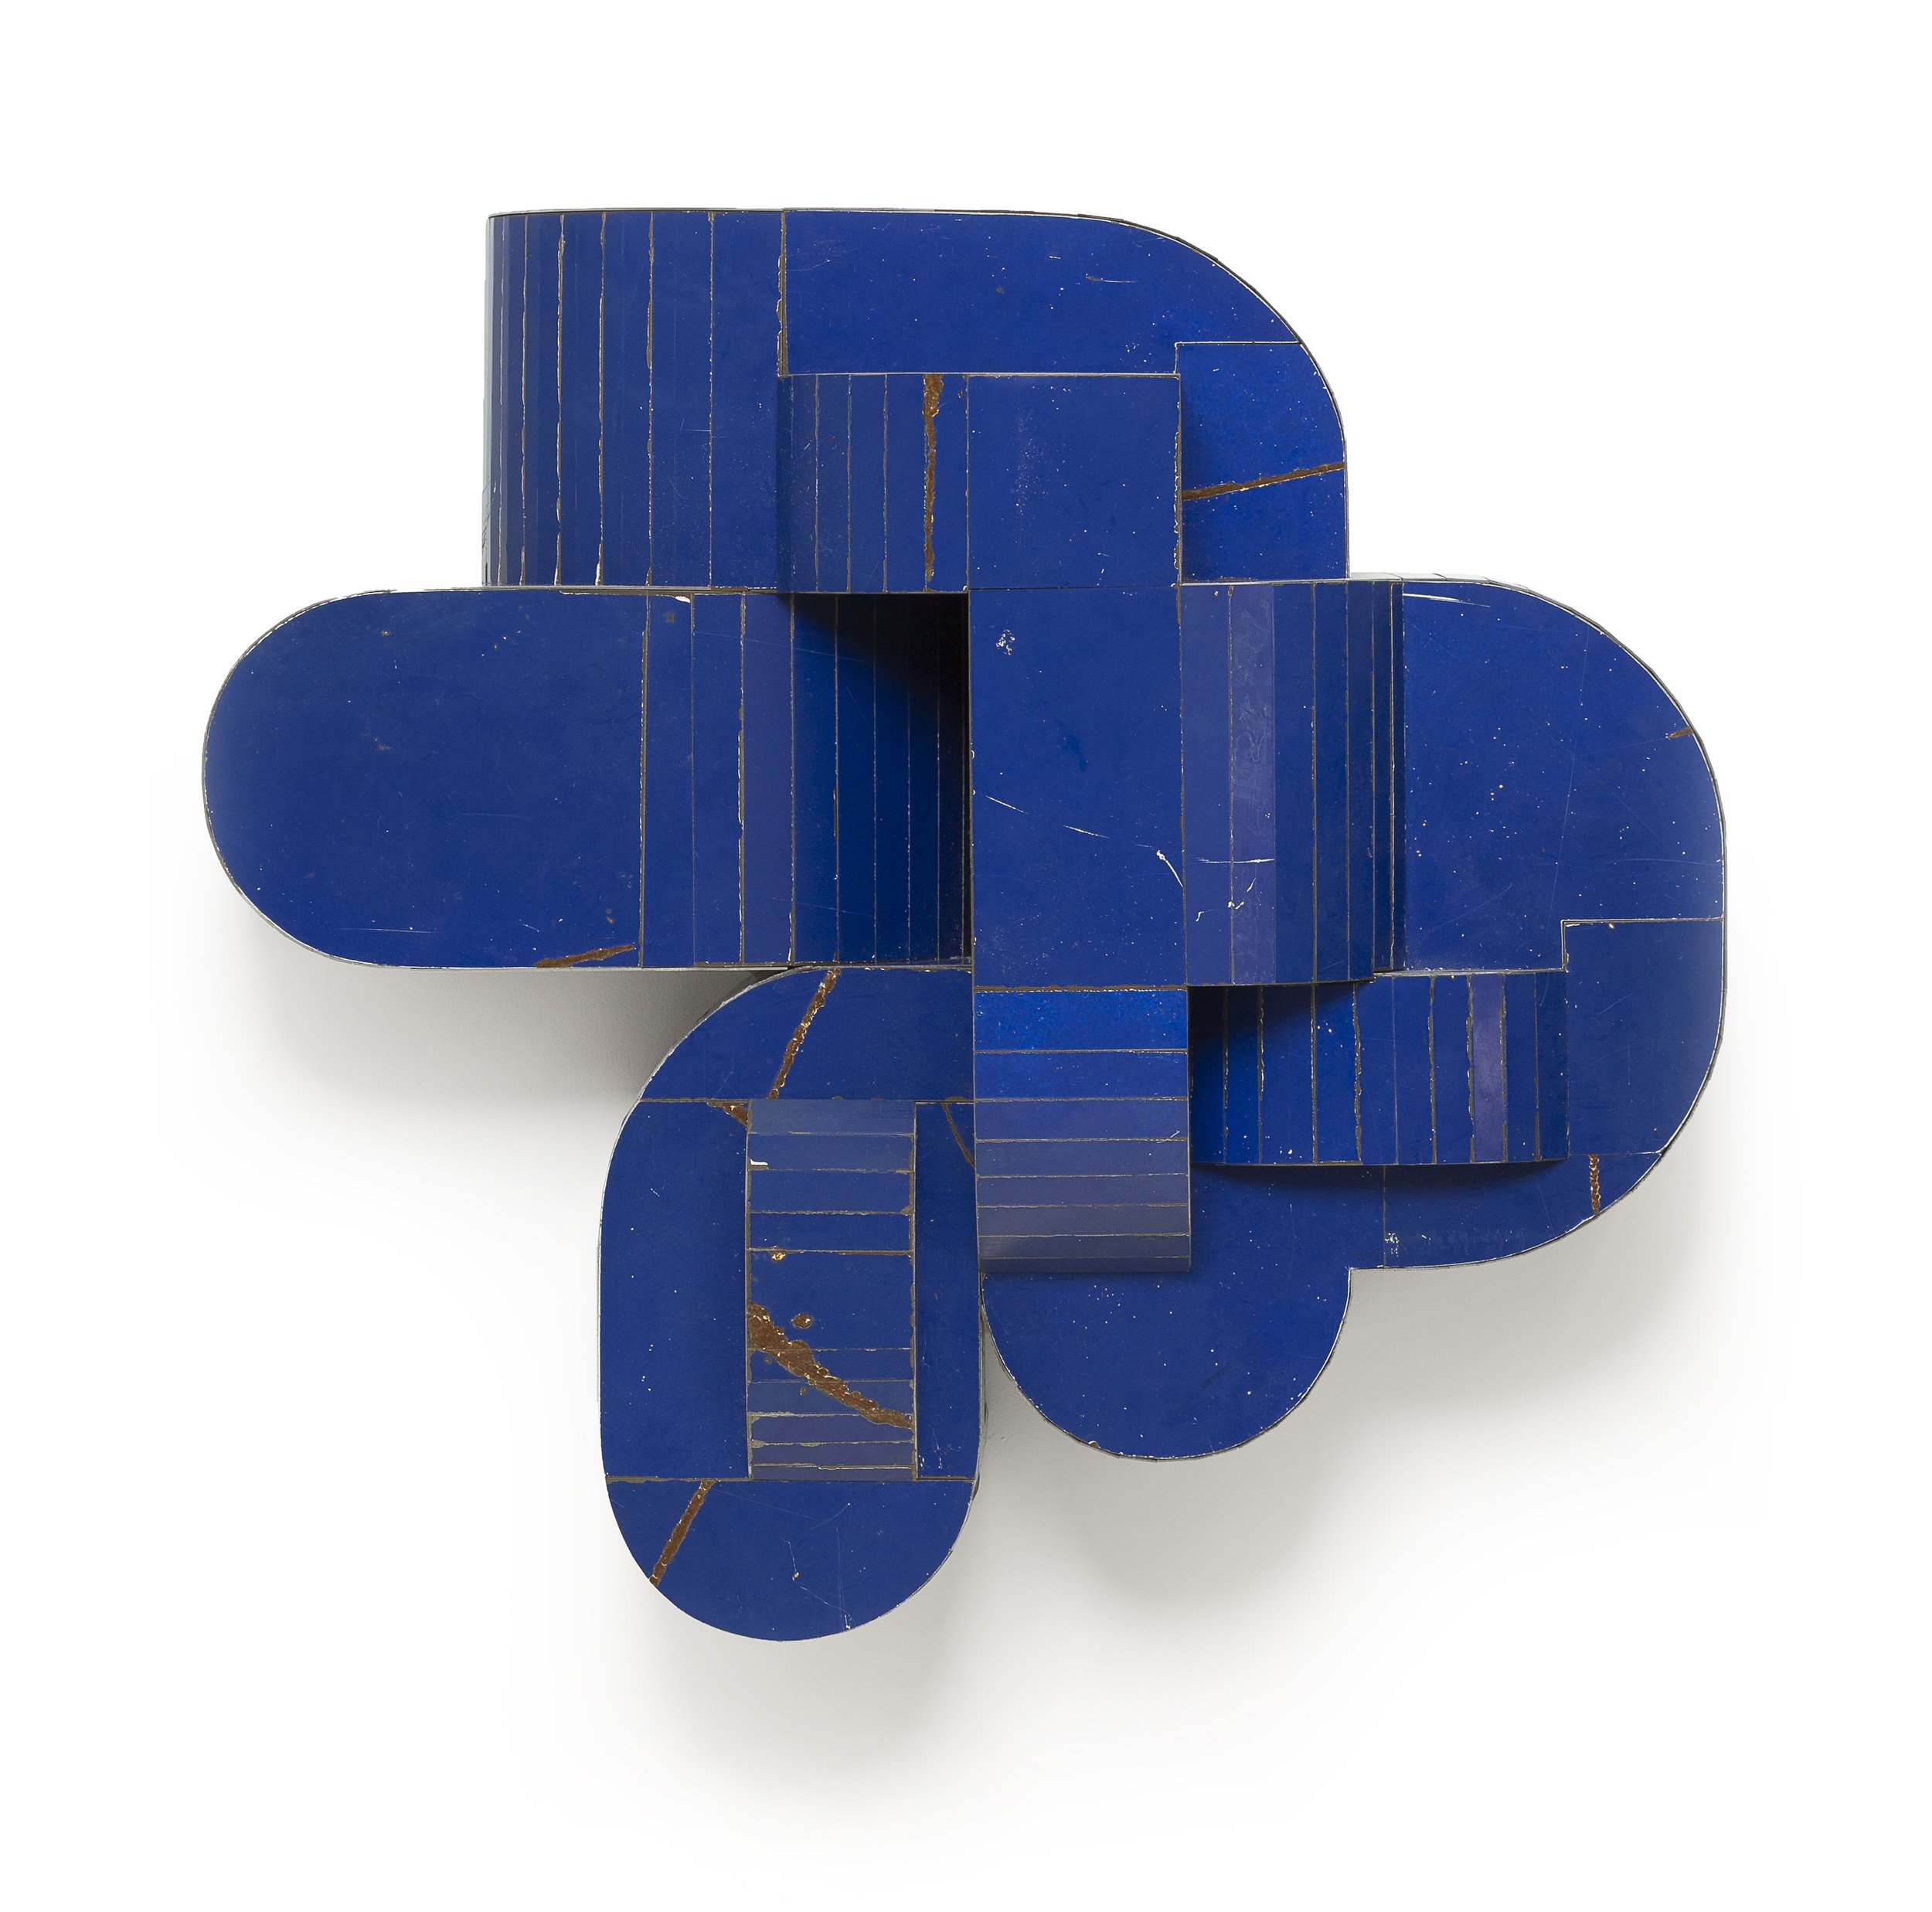 Loyal Opposition | 16 1/2 x 18 x 6 1/2 inches / 41.9 x 45.7 x 16.51 cm, salvage steel, marine-grade plywood, silicone, vulcanized rubber, hardware, 2024